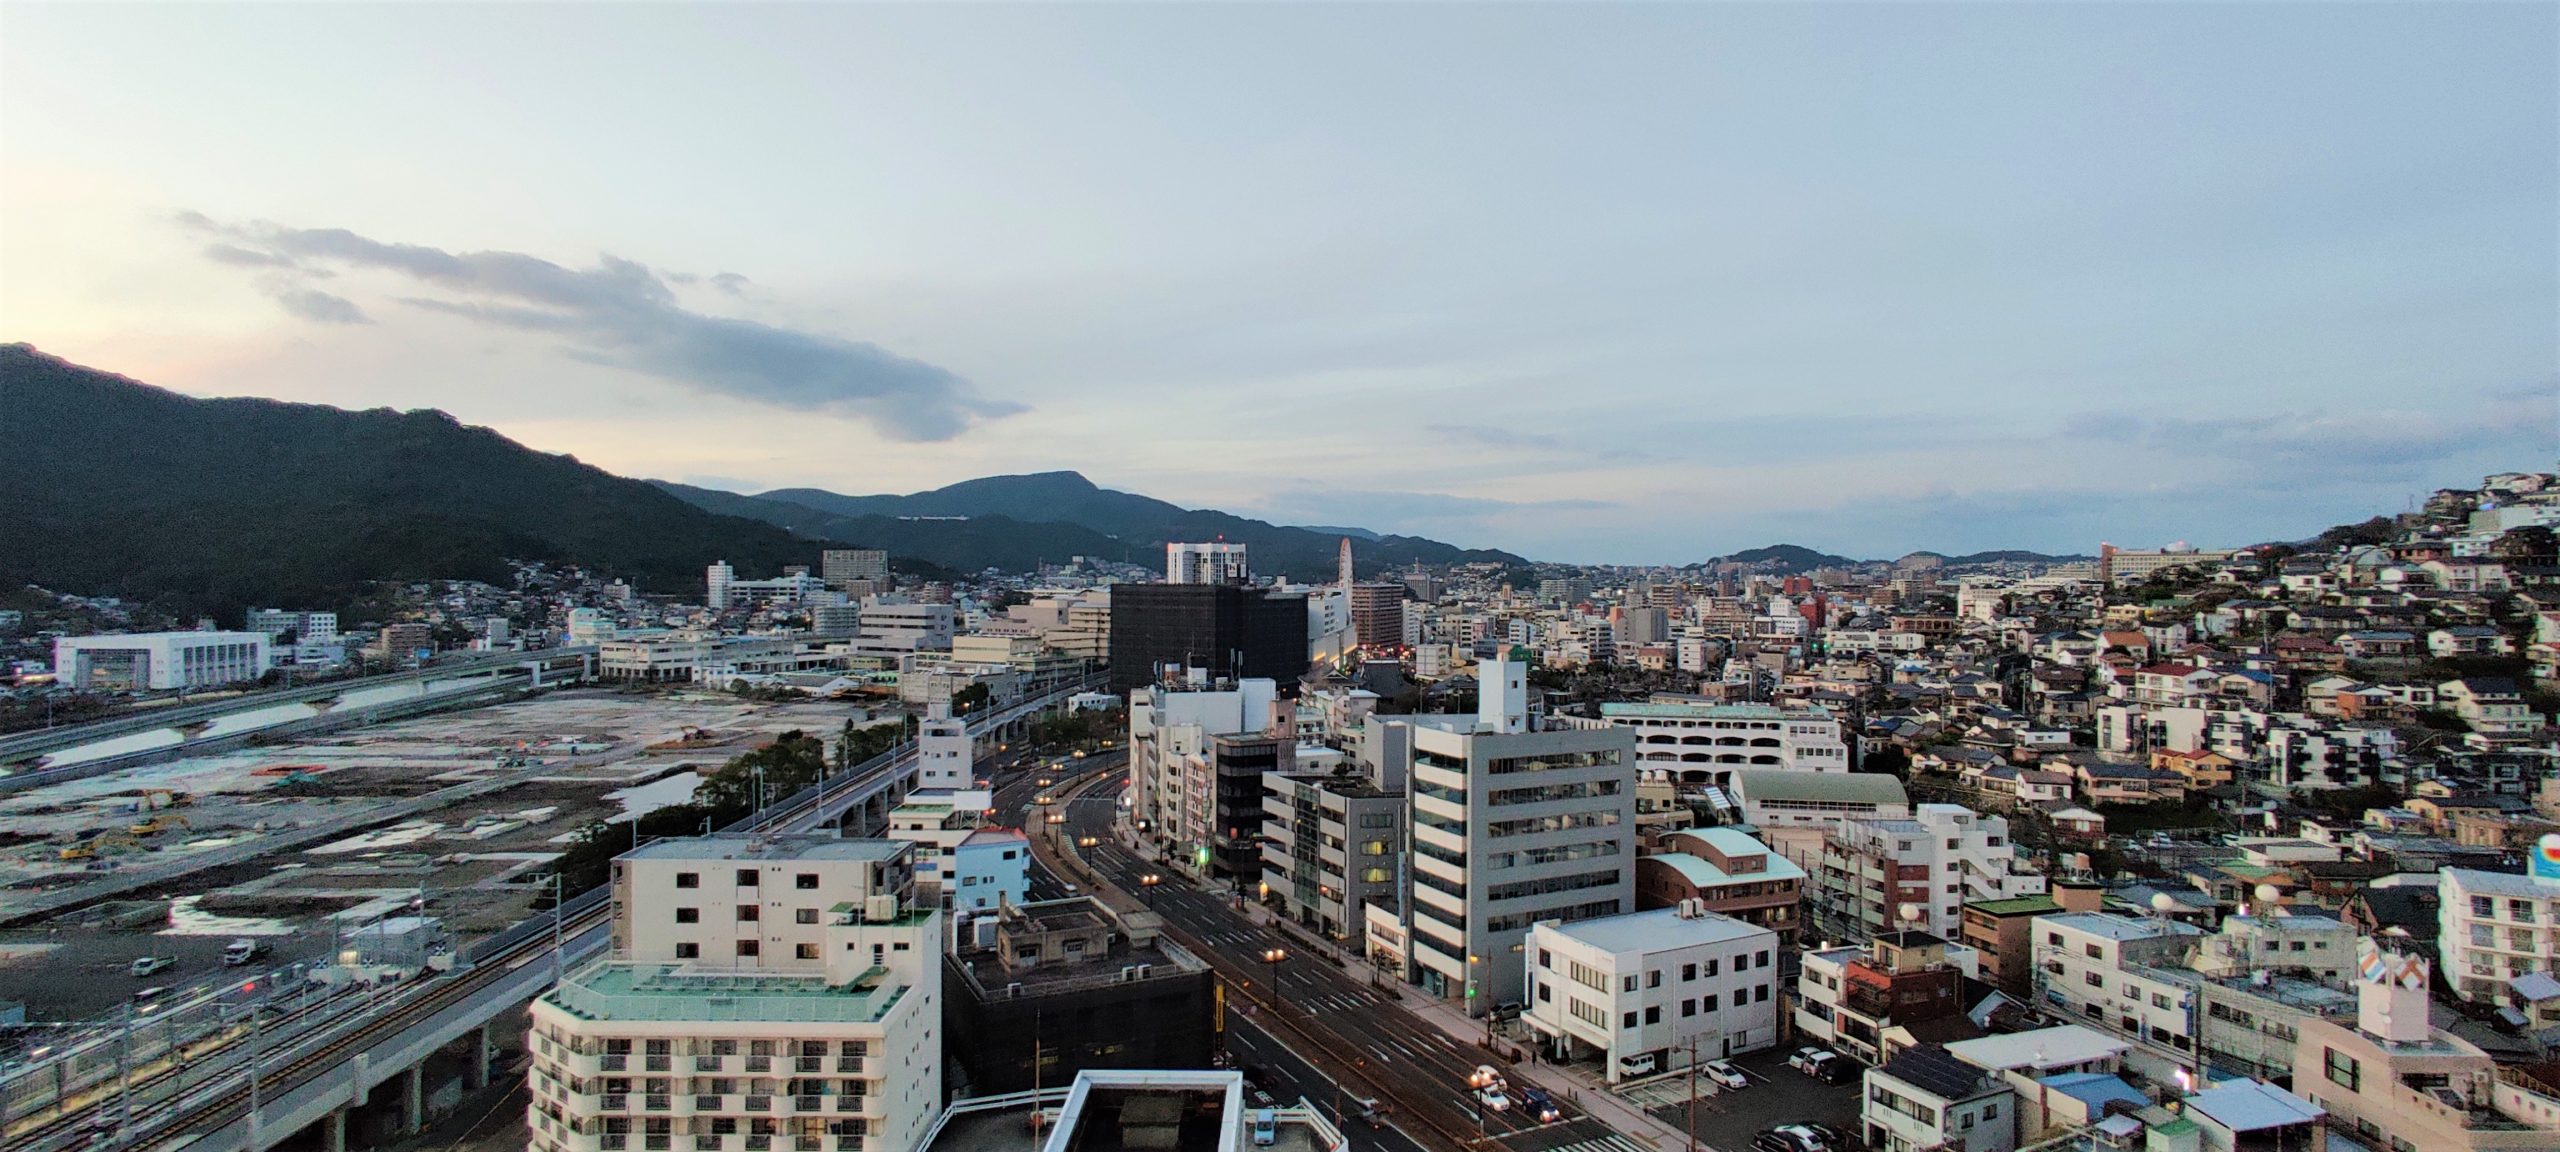 View of Nagasaki from above